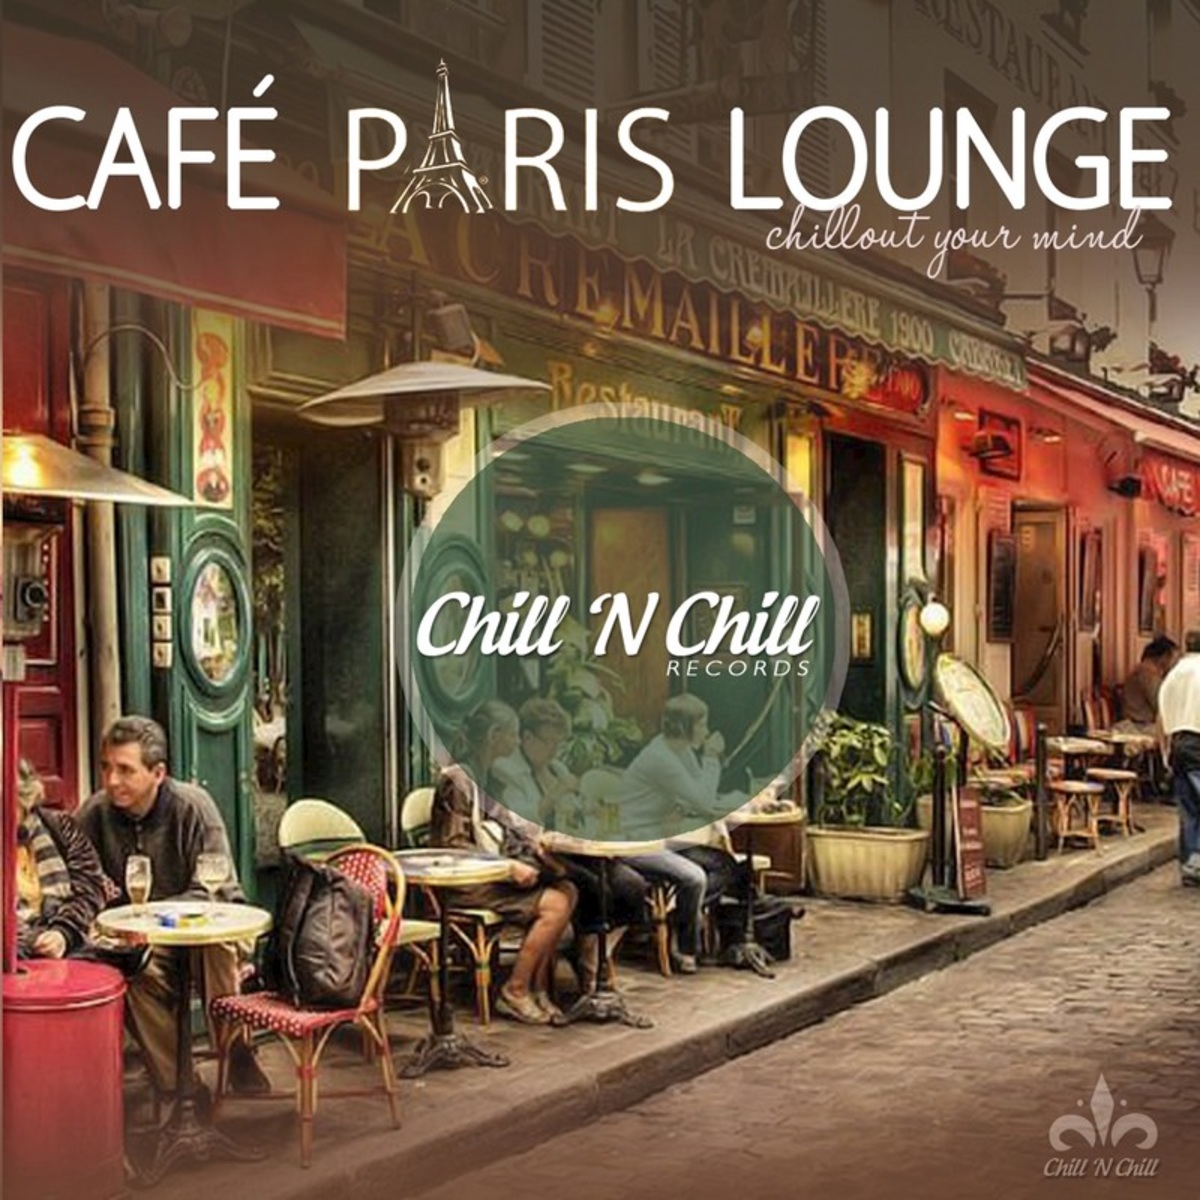 chill n chill records《cafe paris lounge：chillout your mind》cd级